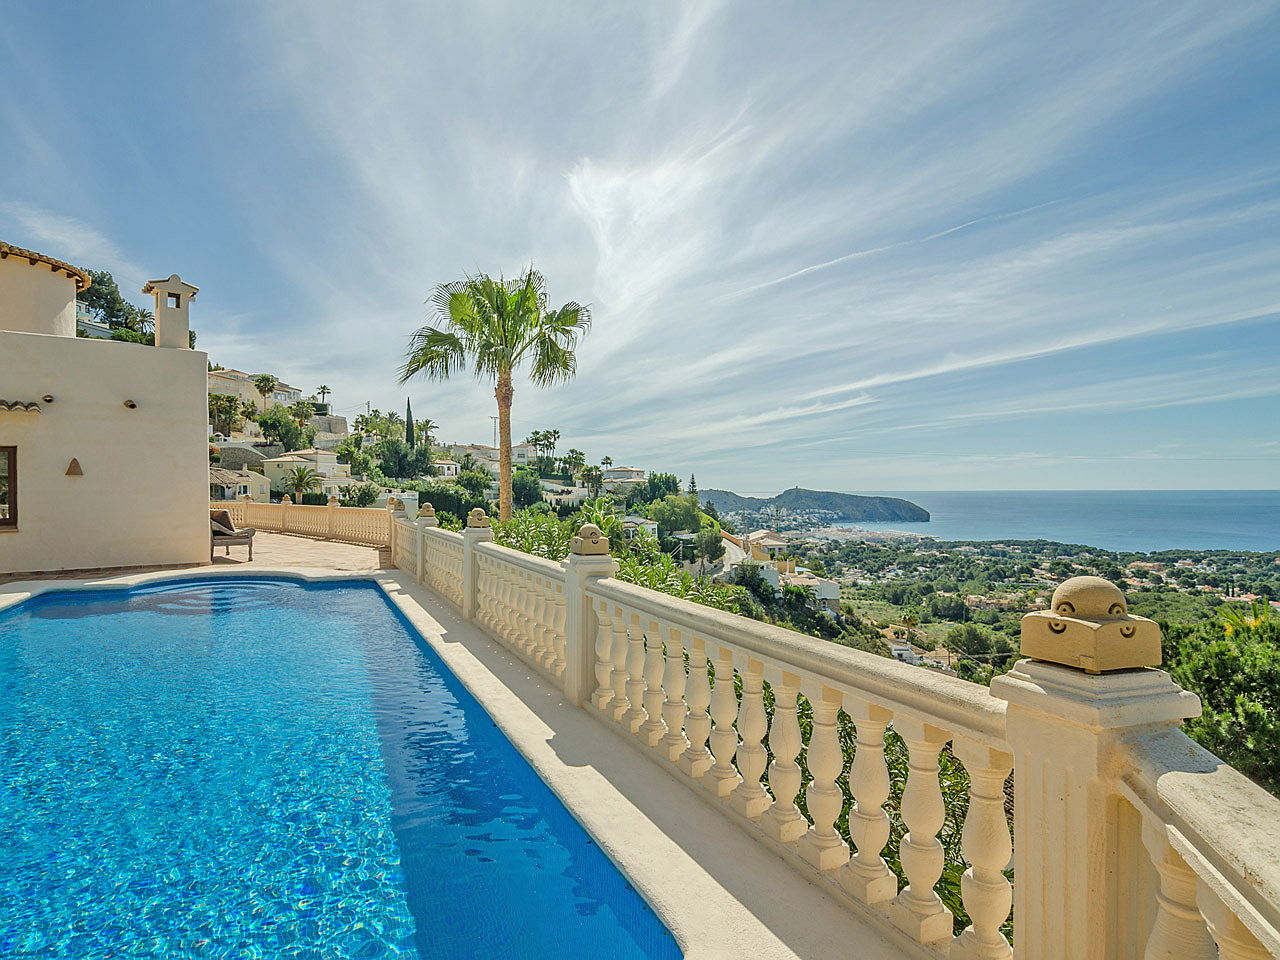  Moraira, Costa Blanca
- This unique high quality luxury property is located in one of the most desirable residential areas at the Costa Blanca and offers stunning panoramic sea views.